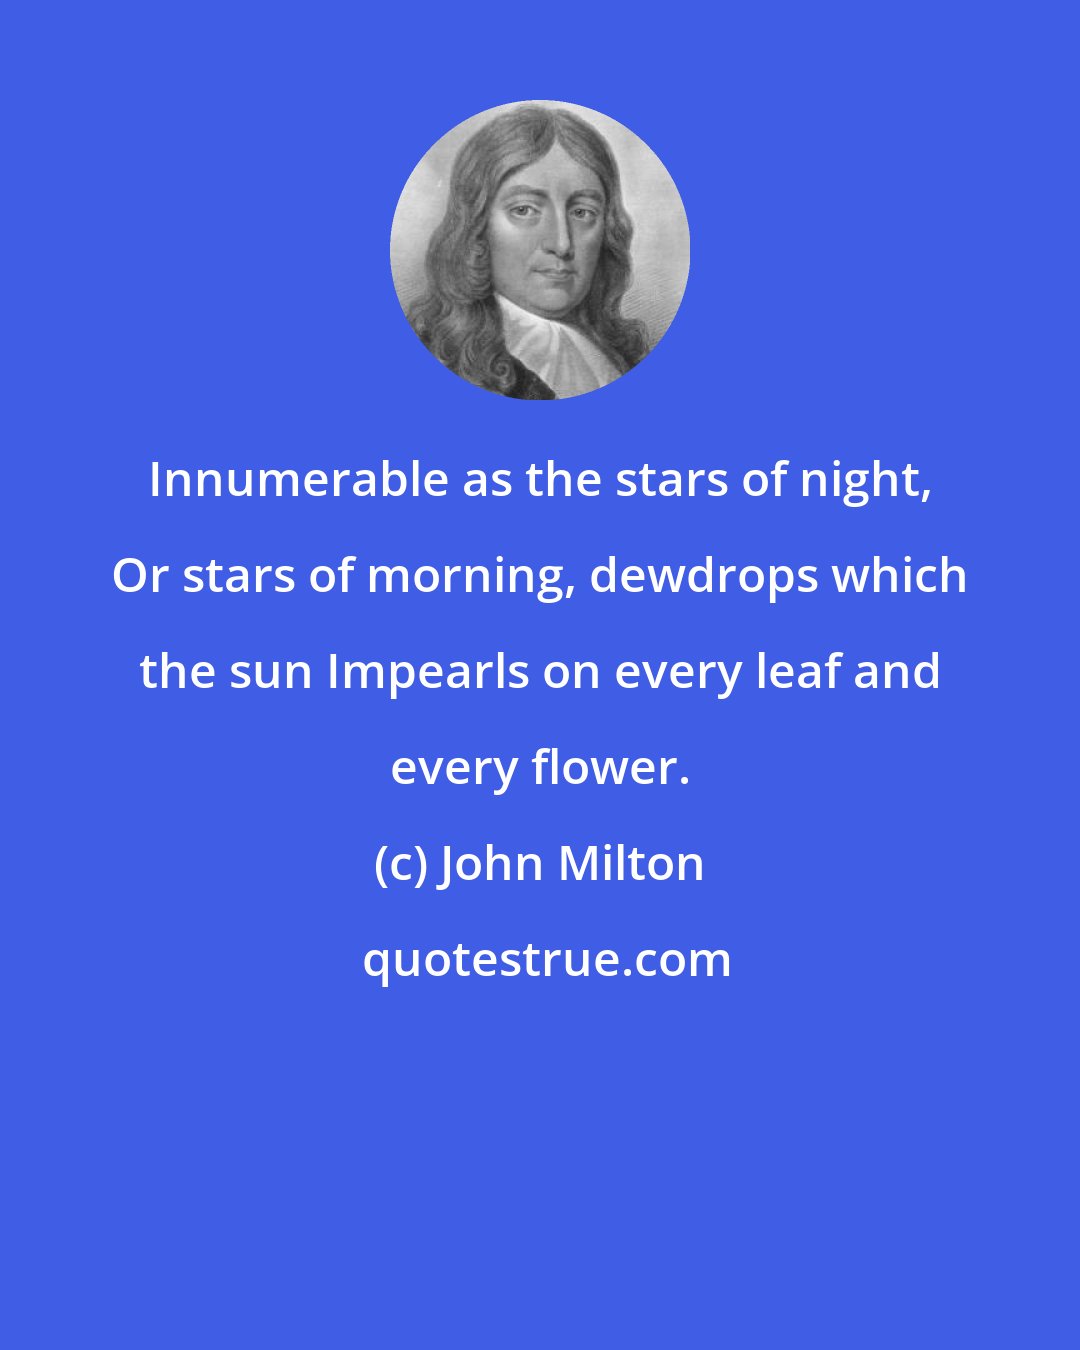 John Milton: Innumerable as the stars of night, Or stars of morning, dewdrops which the sun Impearls on every leaf and every flower.